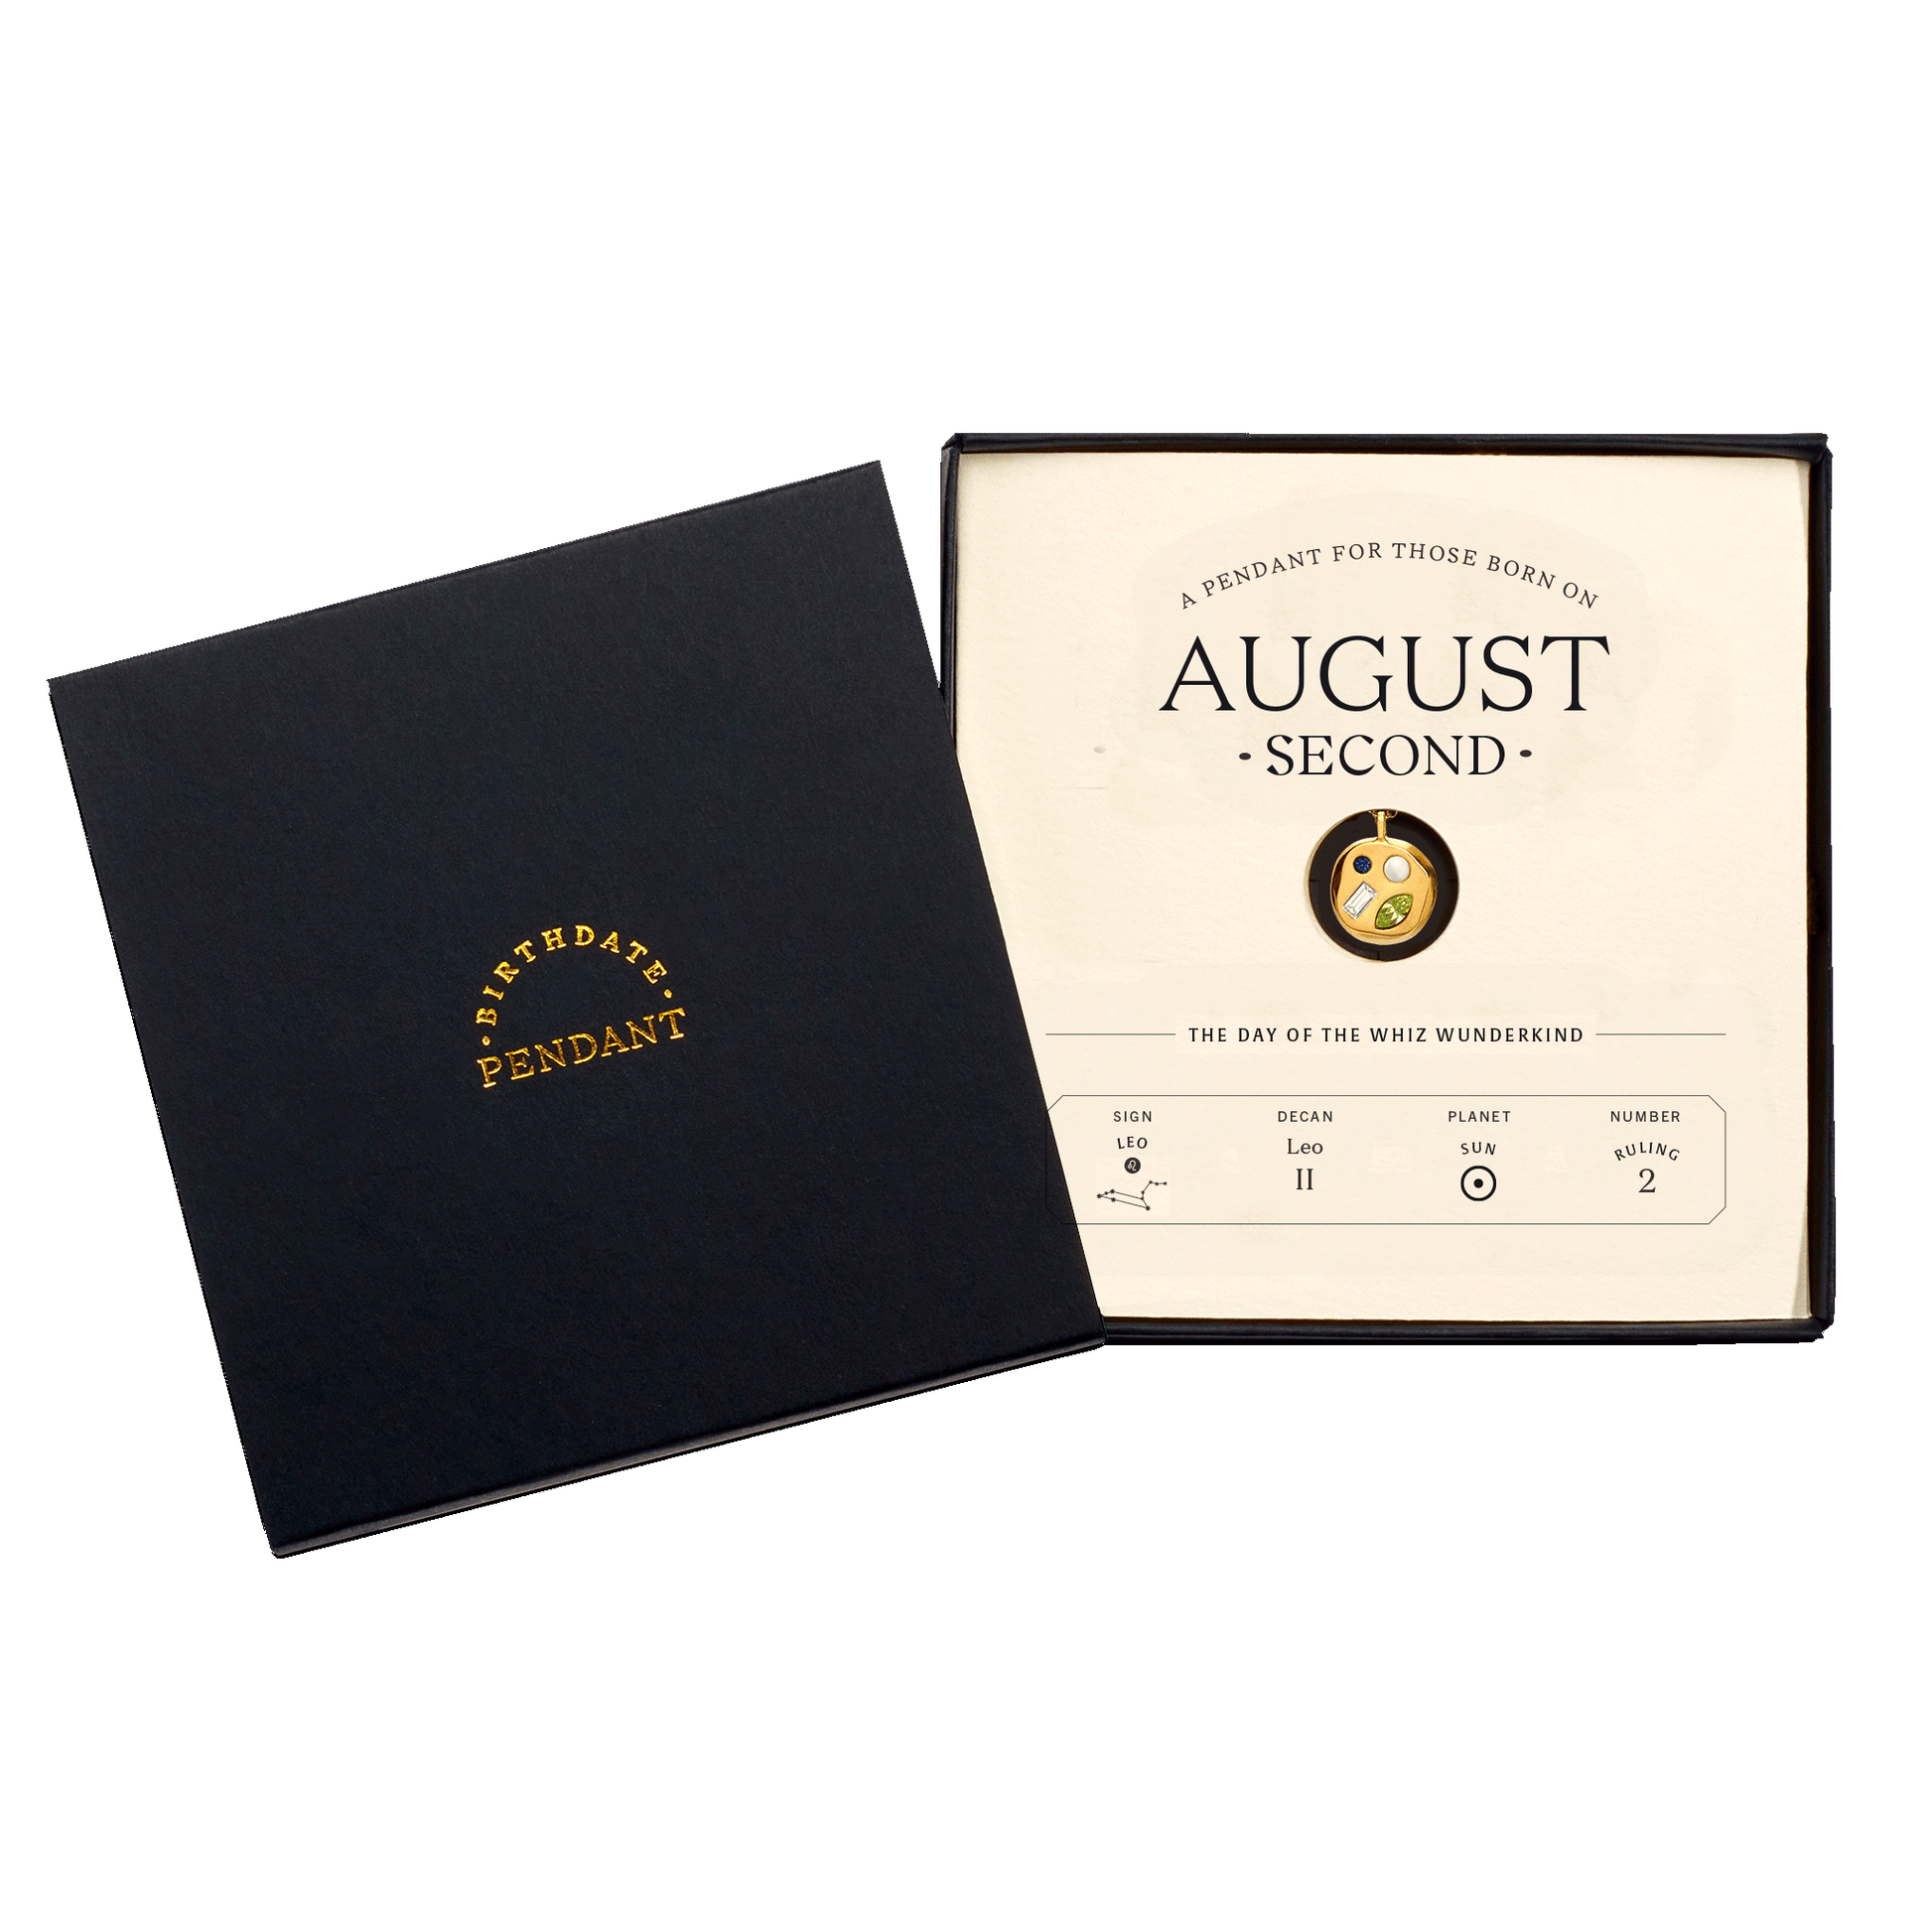 The August Second Pendant inside its box